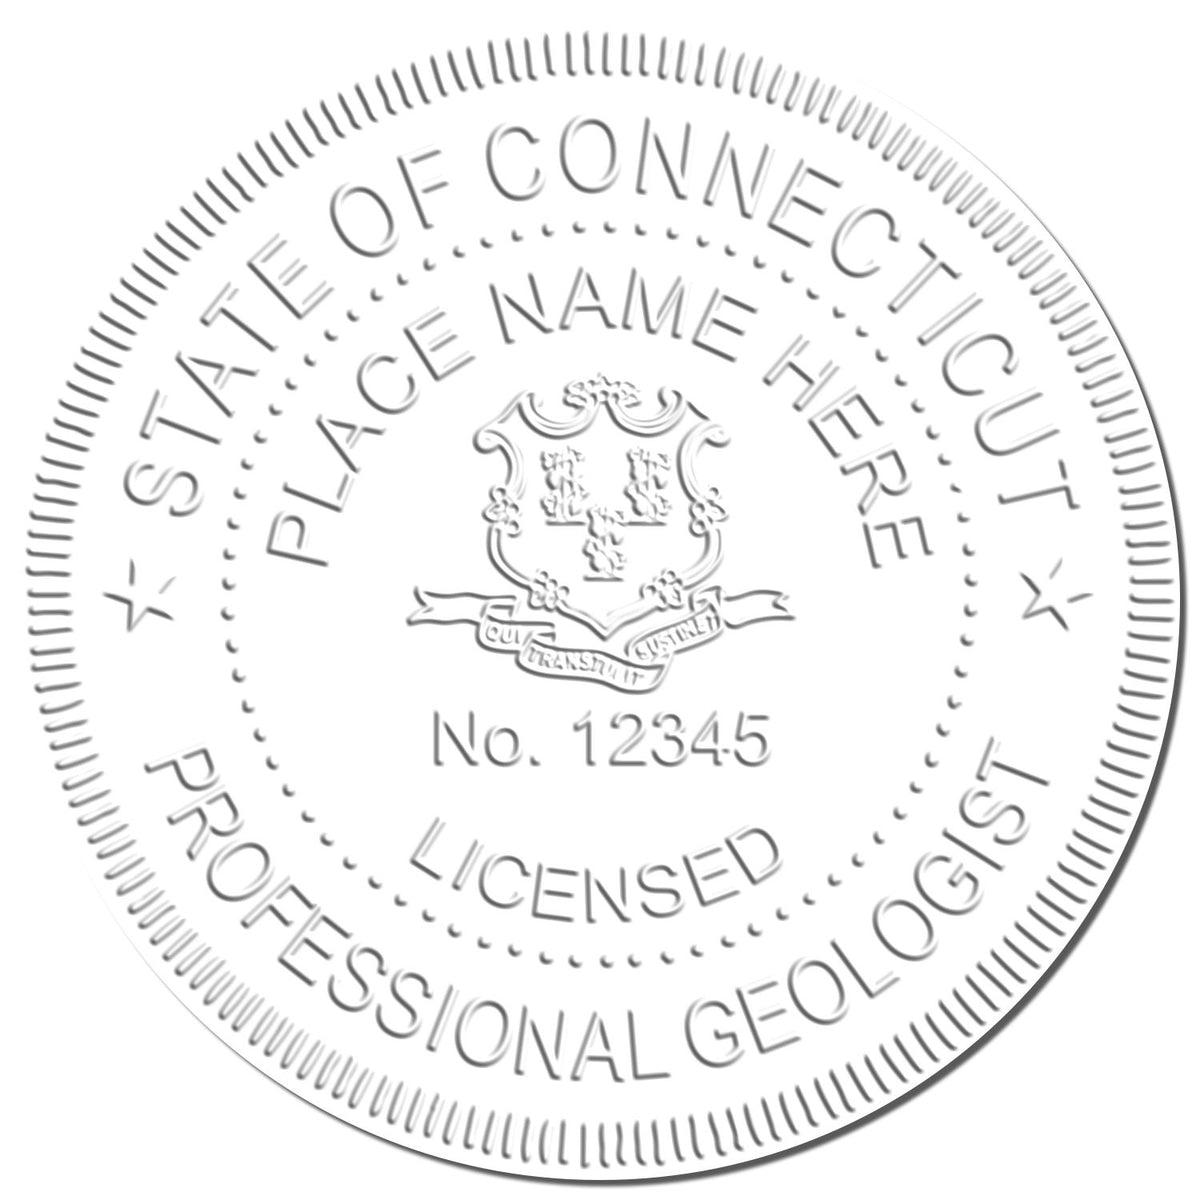 This paper is stamped with a sample imprint of the Handheld Connecticut Professional Geologist Embosser, signifying its quality and reliability.